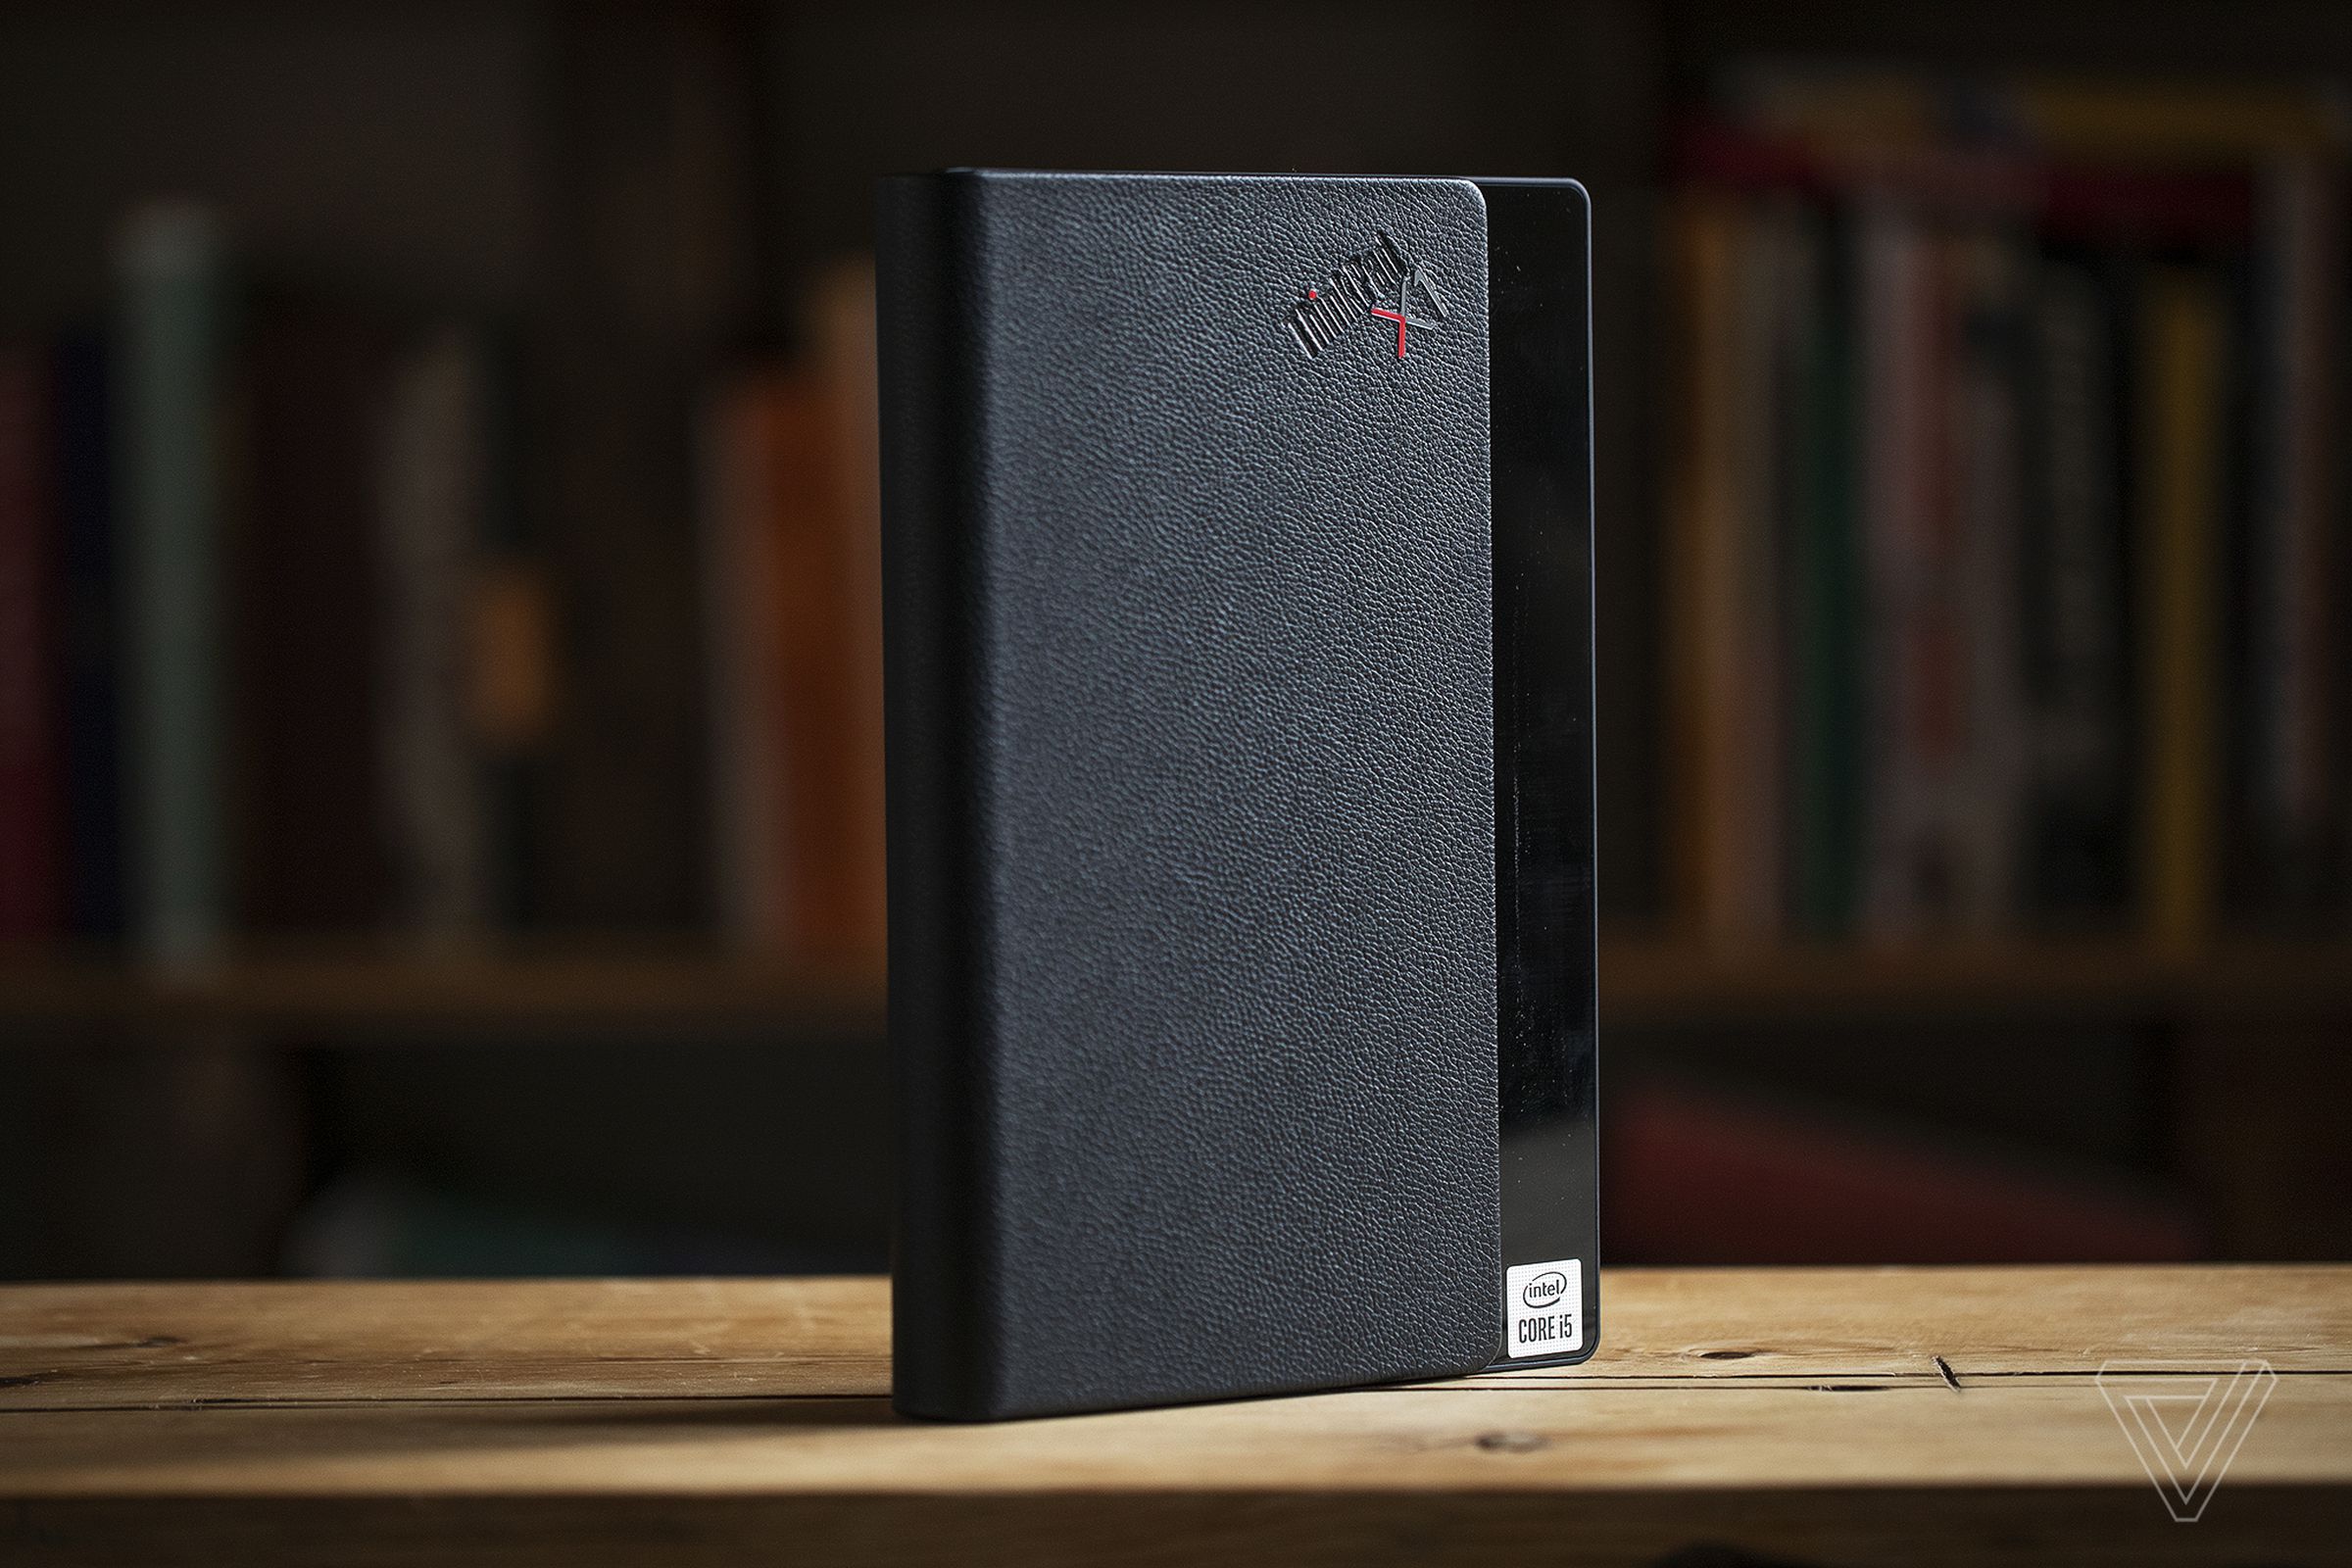 The Lenovo ThinkPad X1 Fold closed, standing upright on a table.